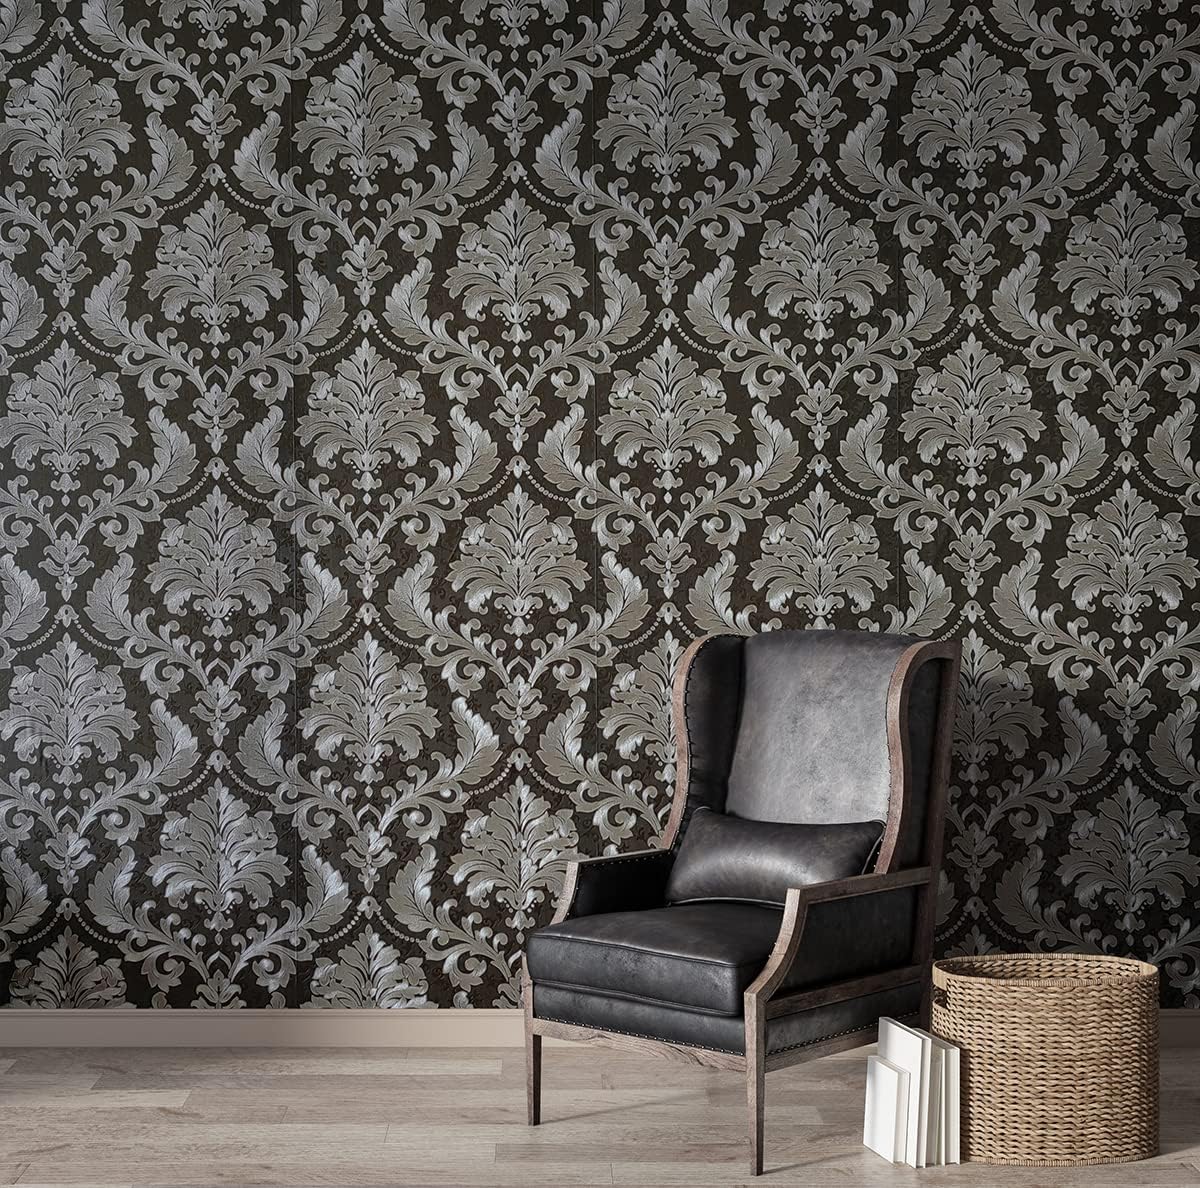 AMINAH DECO Thick Black Silver Damask Wallpaper Embossed Decorative WallCovering Vinyl Waterproof Wall Paper 20.8in x 393.70 in